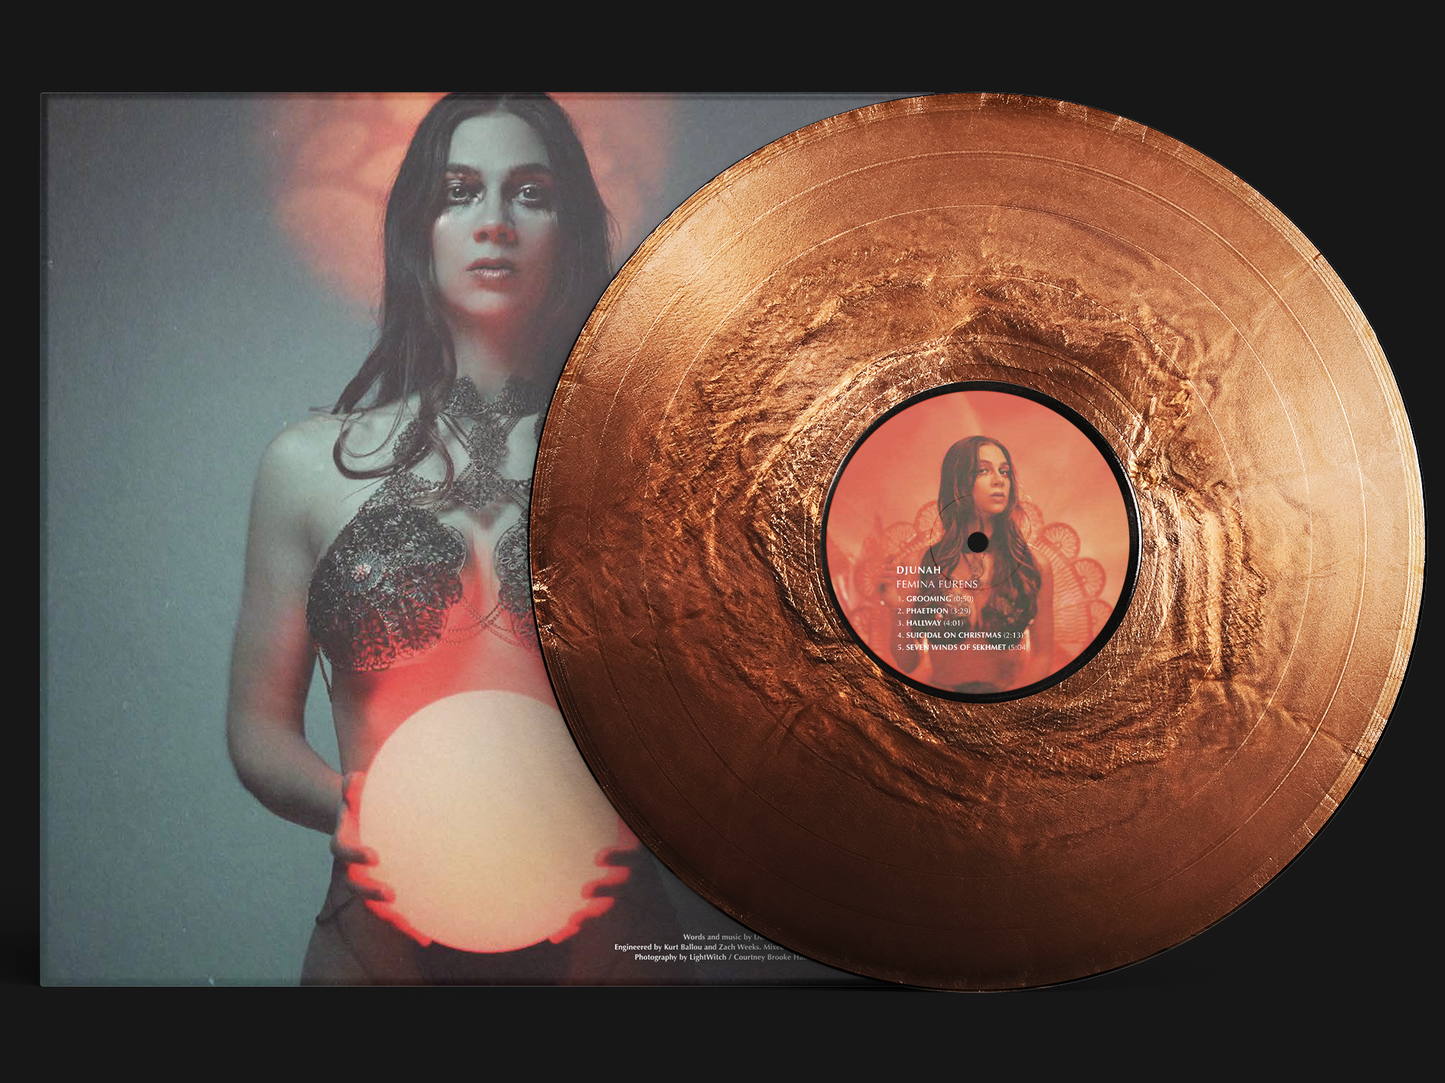 Djunah "Femina Furens" second pressing 12" LP on molten copper vinyl, reverse cover, pressed by Smashed Plastic in Chicago, Illinois